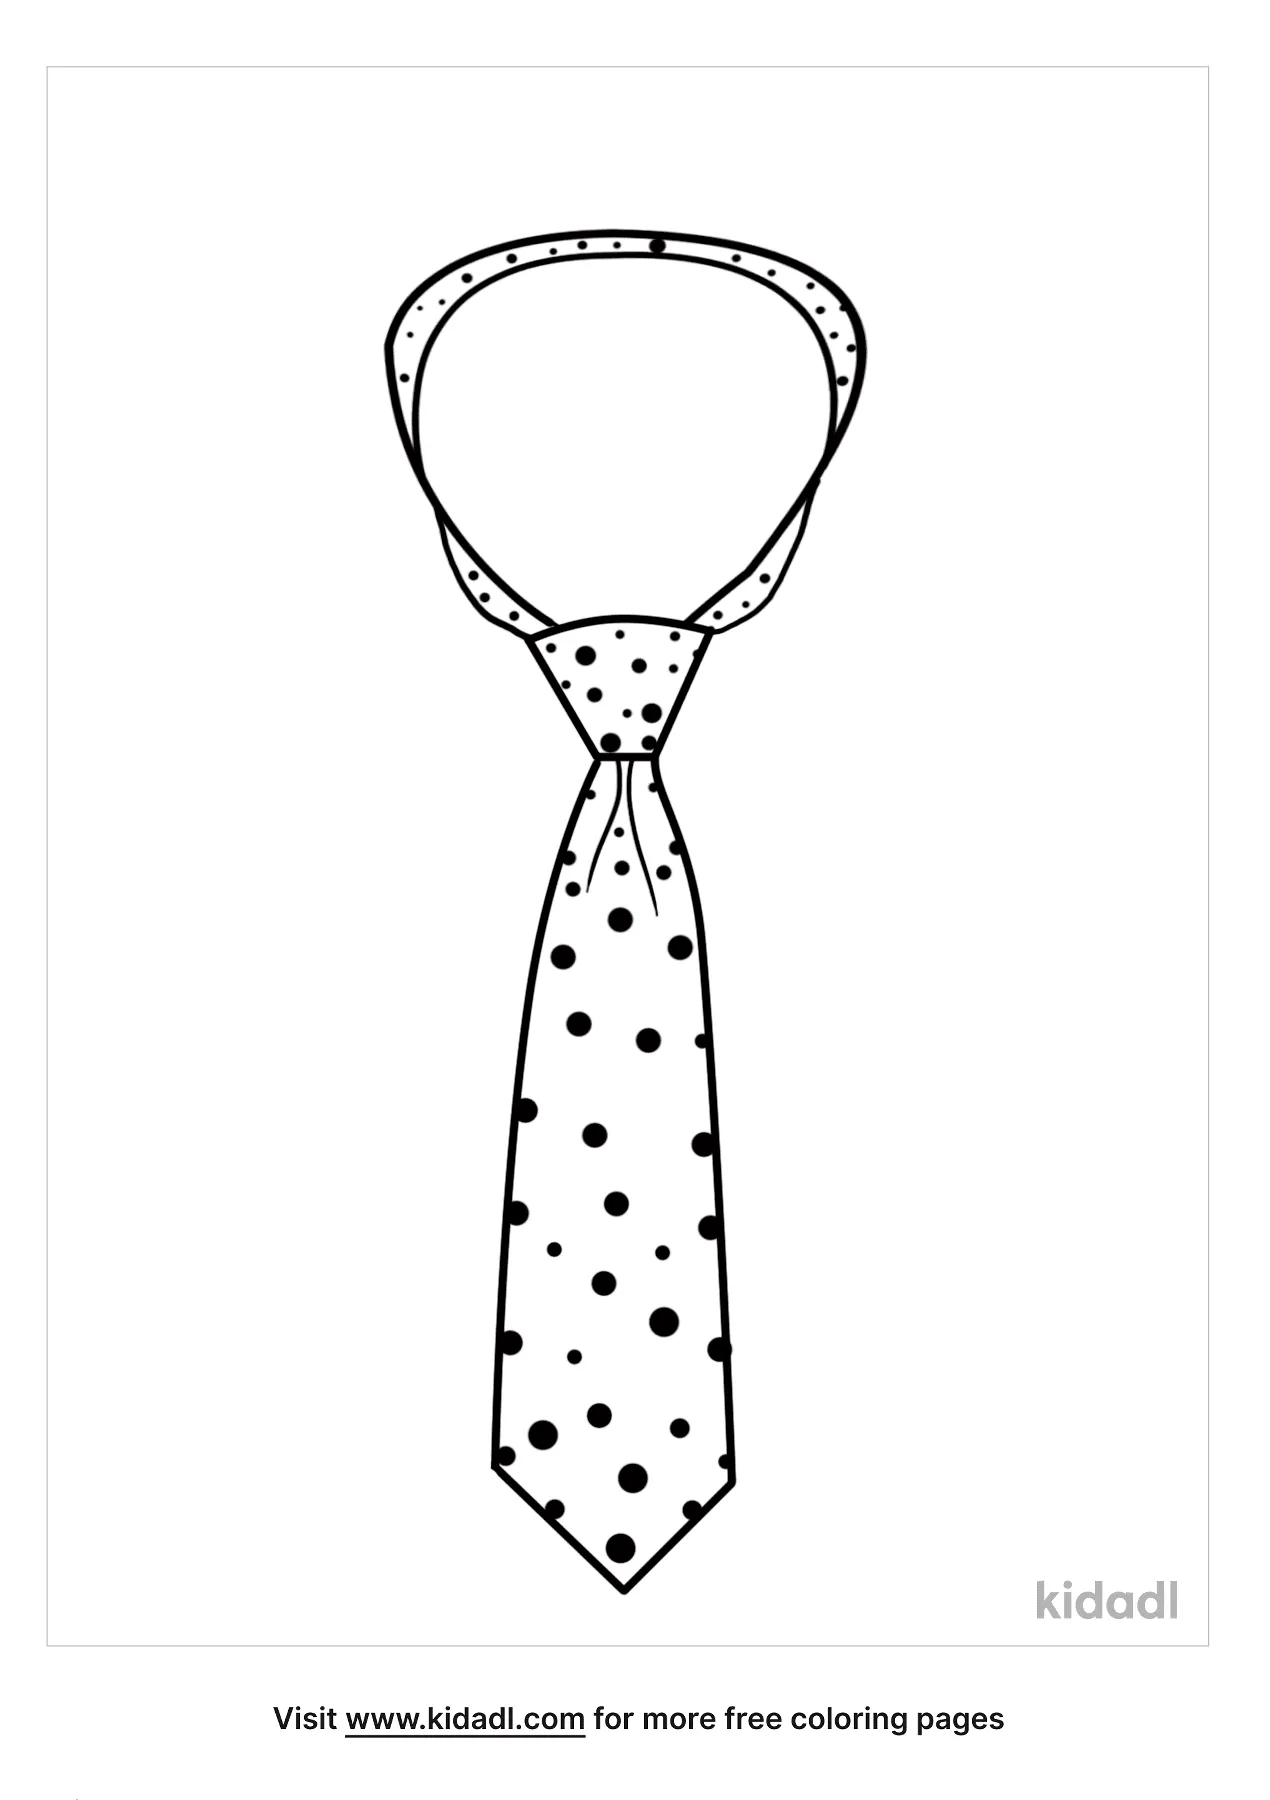 Necktie Coloring Pages Free Fashion Beauty Coloring Pages Kidadl